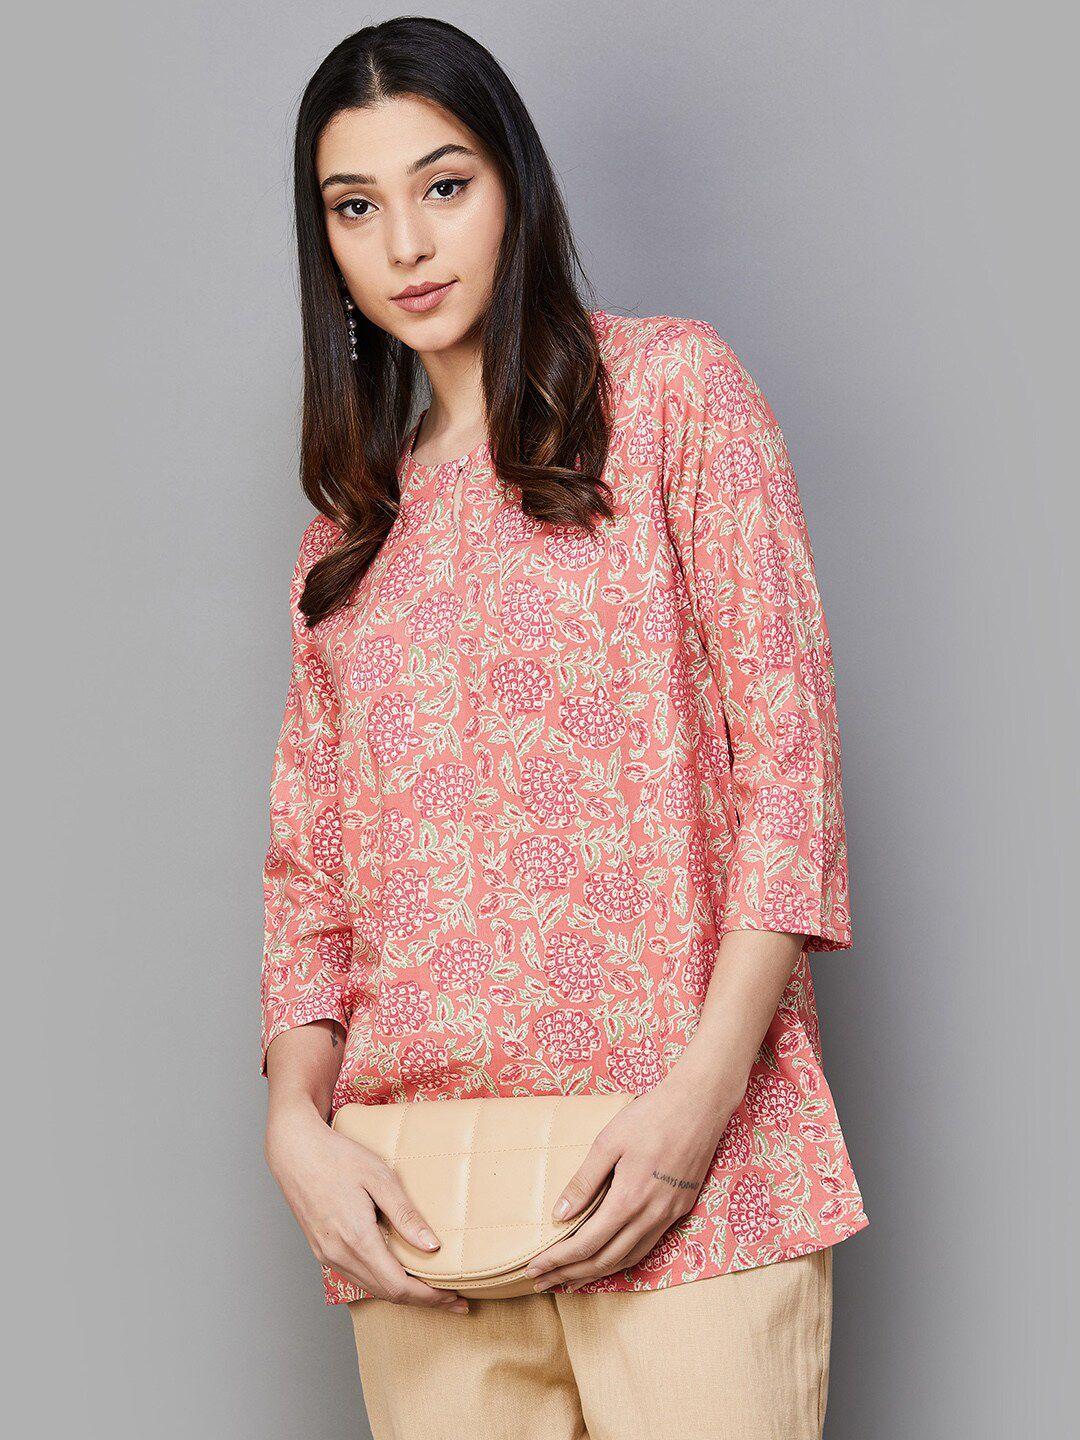 melange-by-lifestyle-floral-printed-pure-cotton-kurti